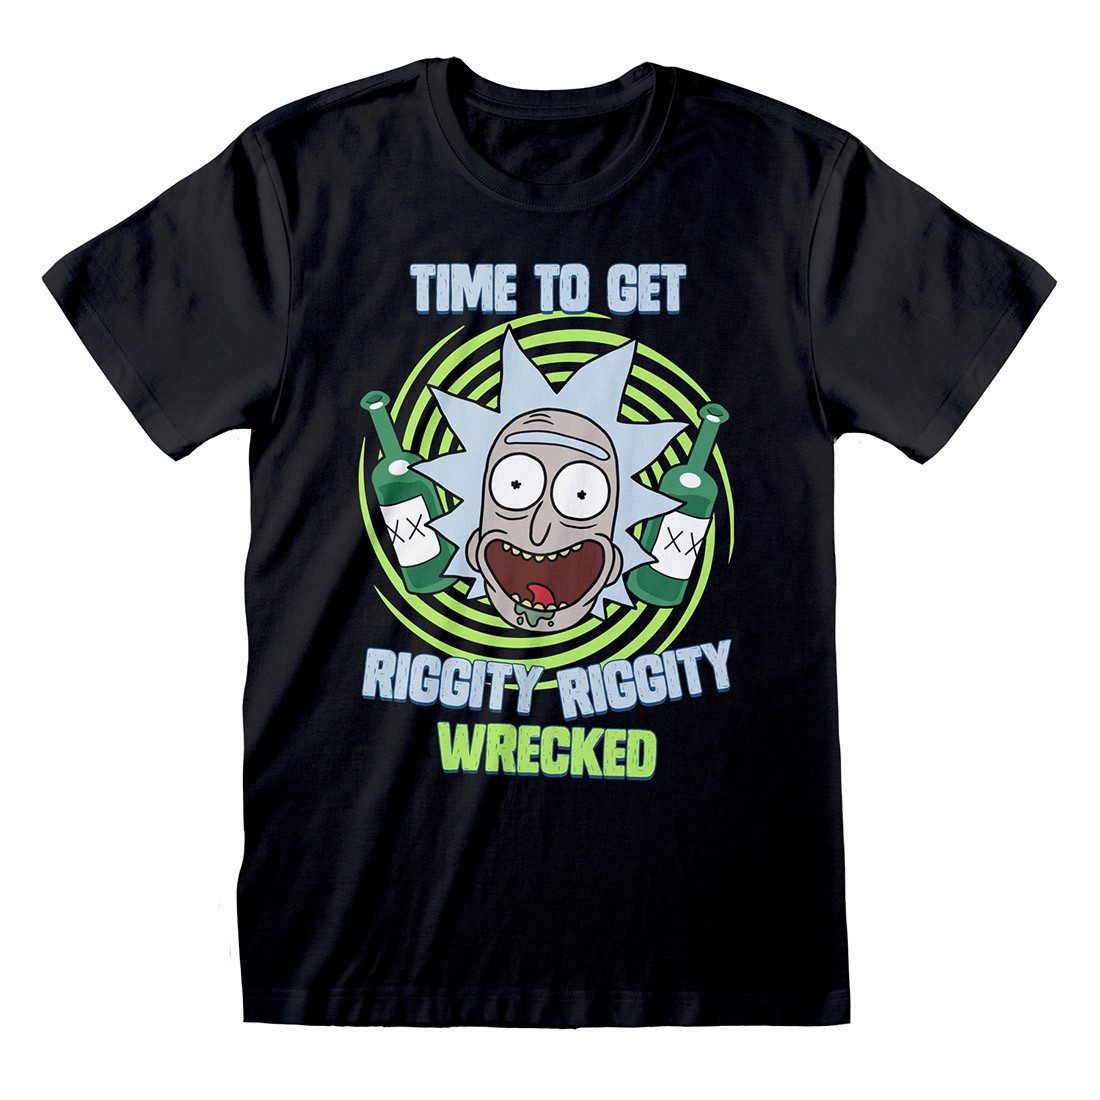 Rick and Morty T-Shirt Riggity Wrecked